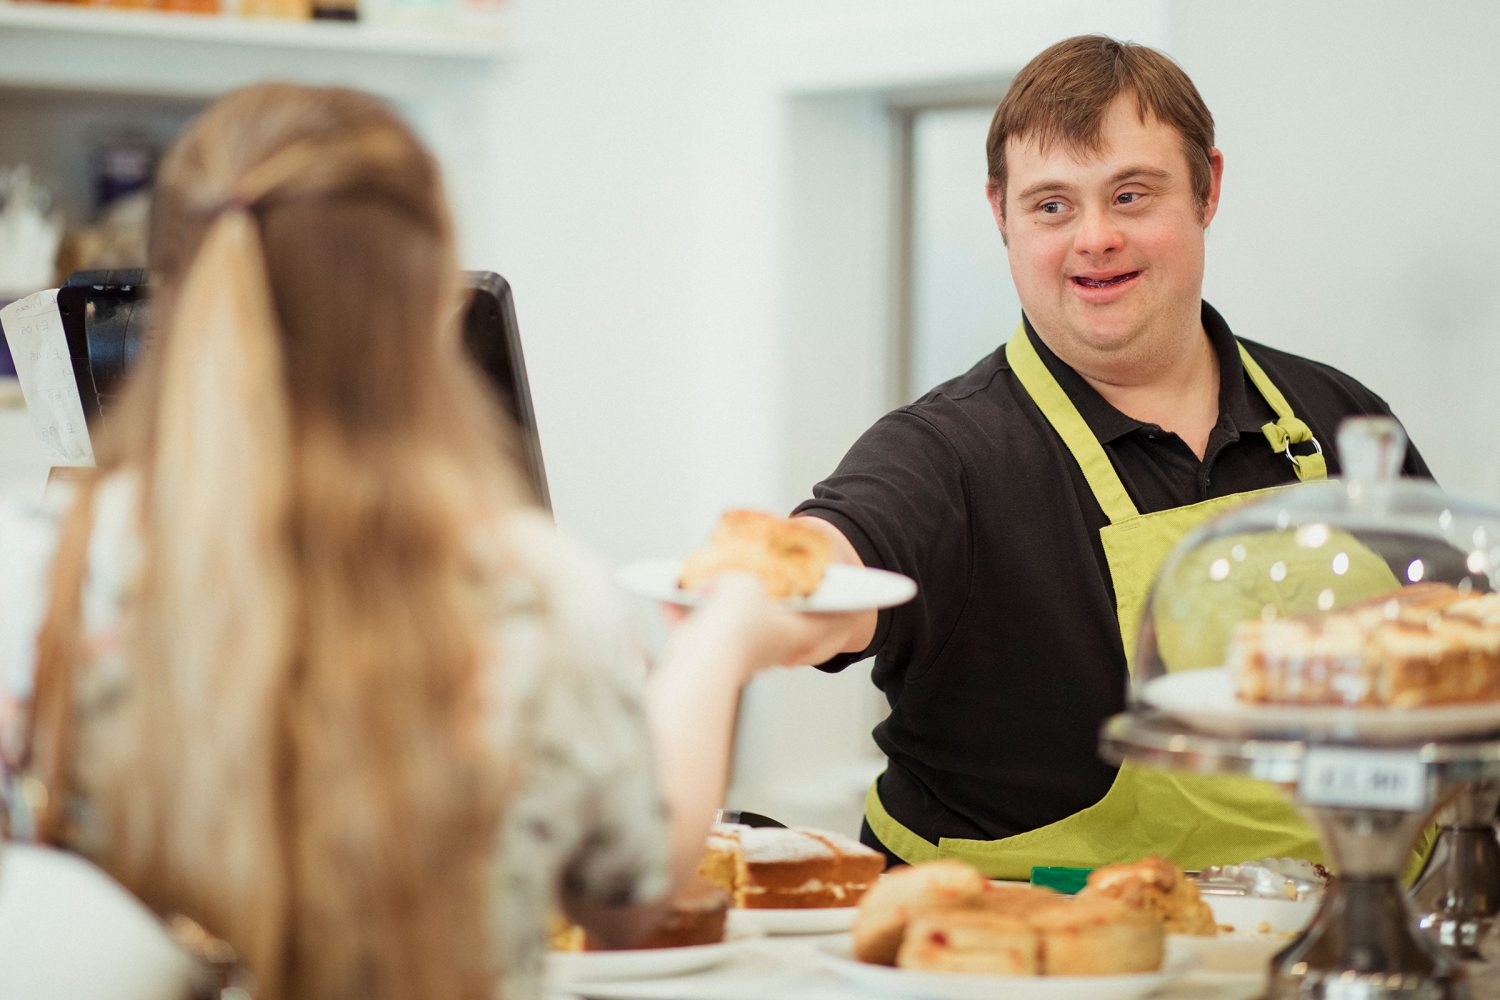 Man with Down syndrome serves customer at cafe